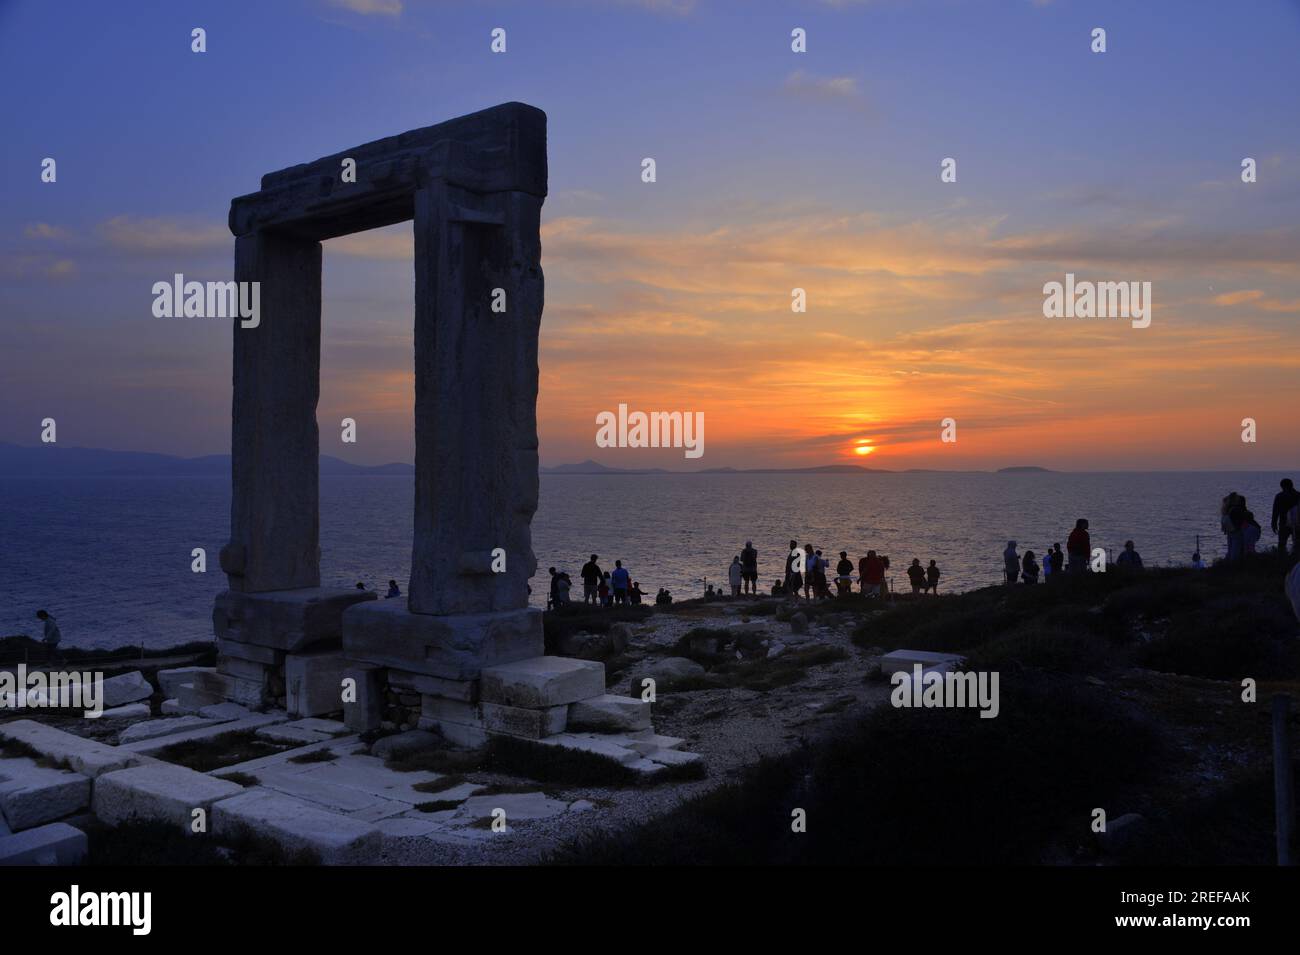 Naxos island, tourists admire the Temple of Apollo entrance at sunset.  Marble doorway standing alone near the sea at sunset. Stock Photo